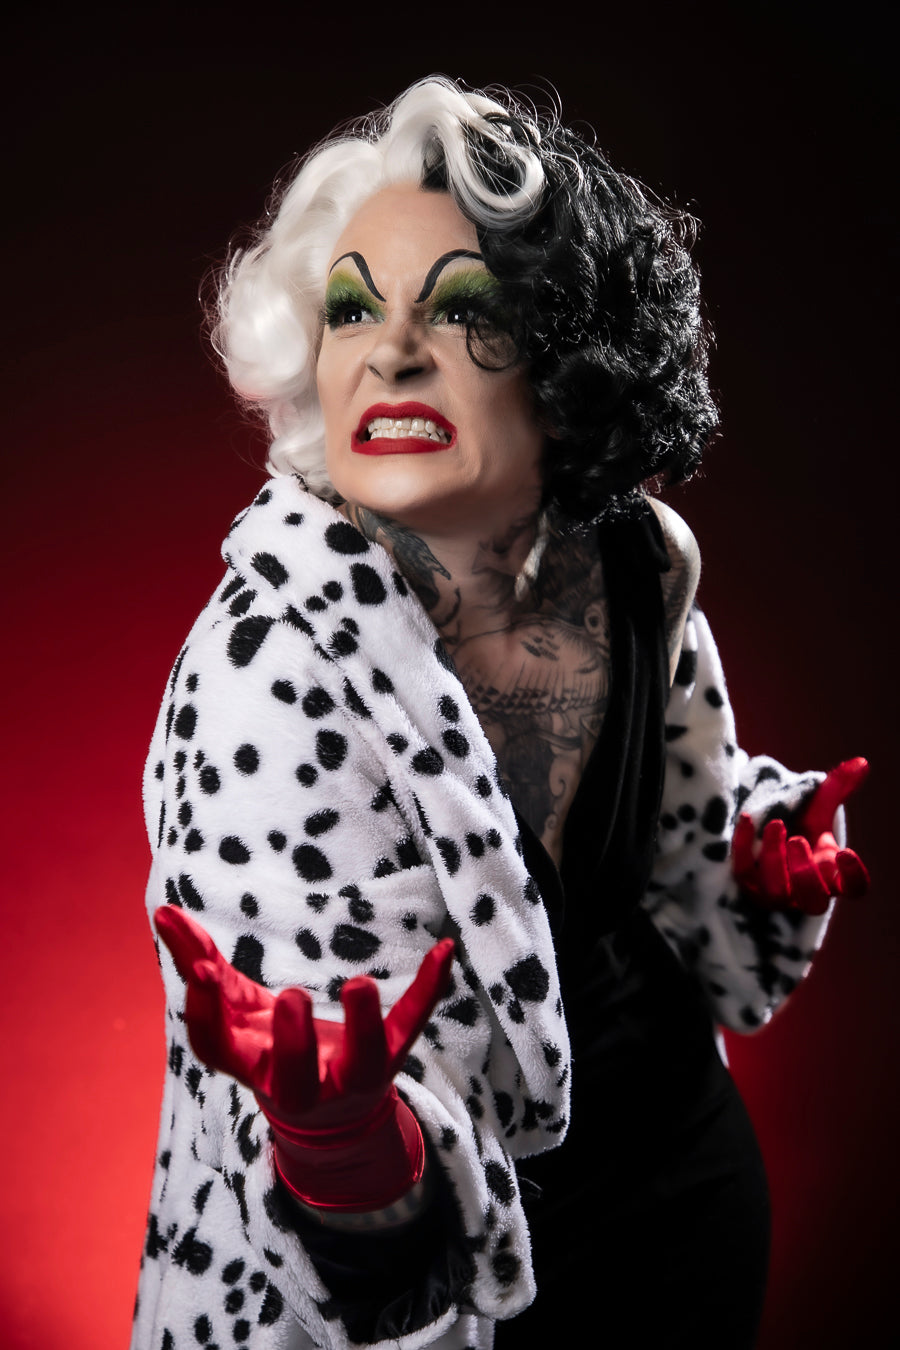 Cruella De Vil 101 Dalmatians Costume Hire or Cosplay, plus Makeup and Photography. Proudly by and available at, Little Shop of Horrors Costumery 6/1 Watt Rd Mornington & Melbourne